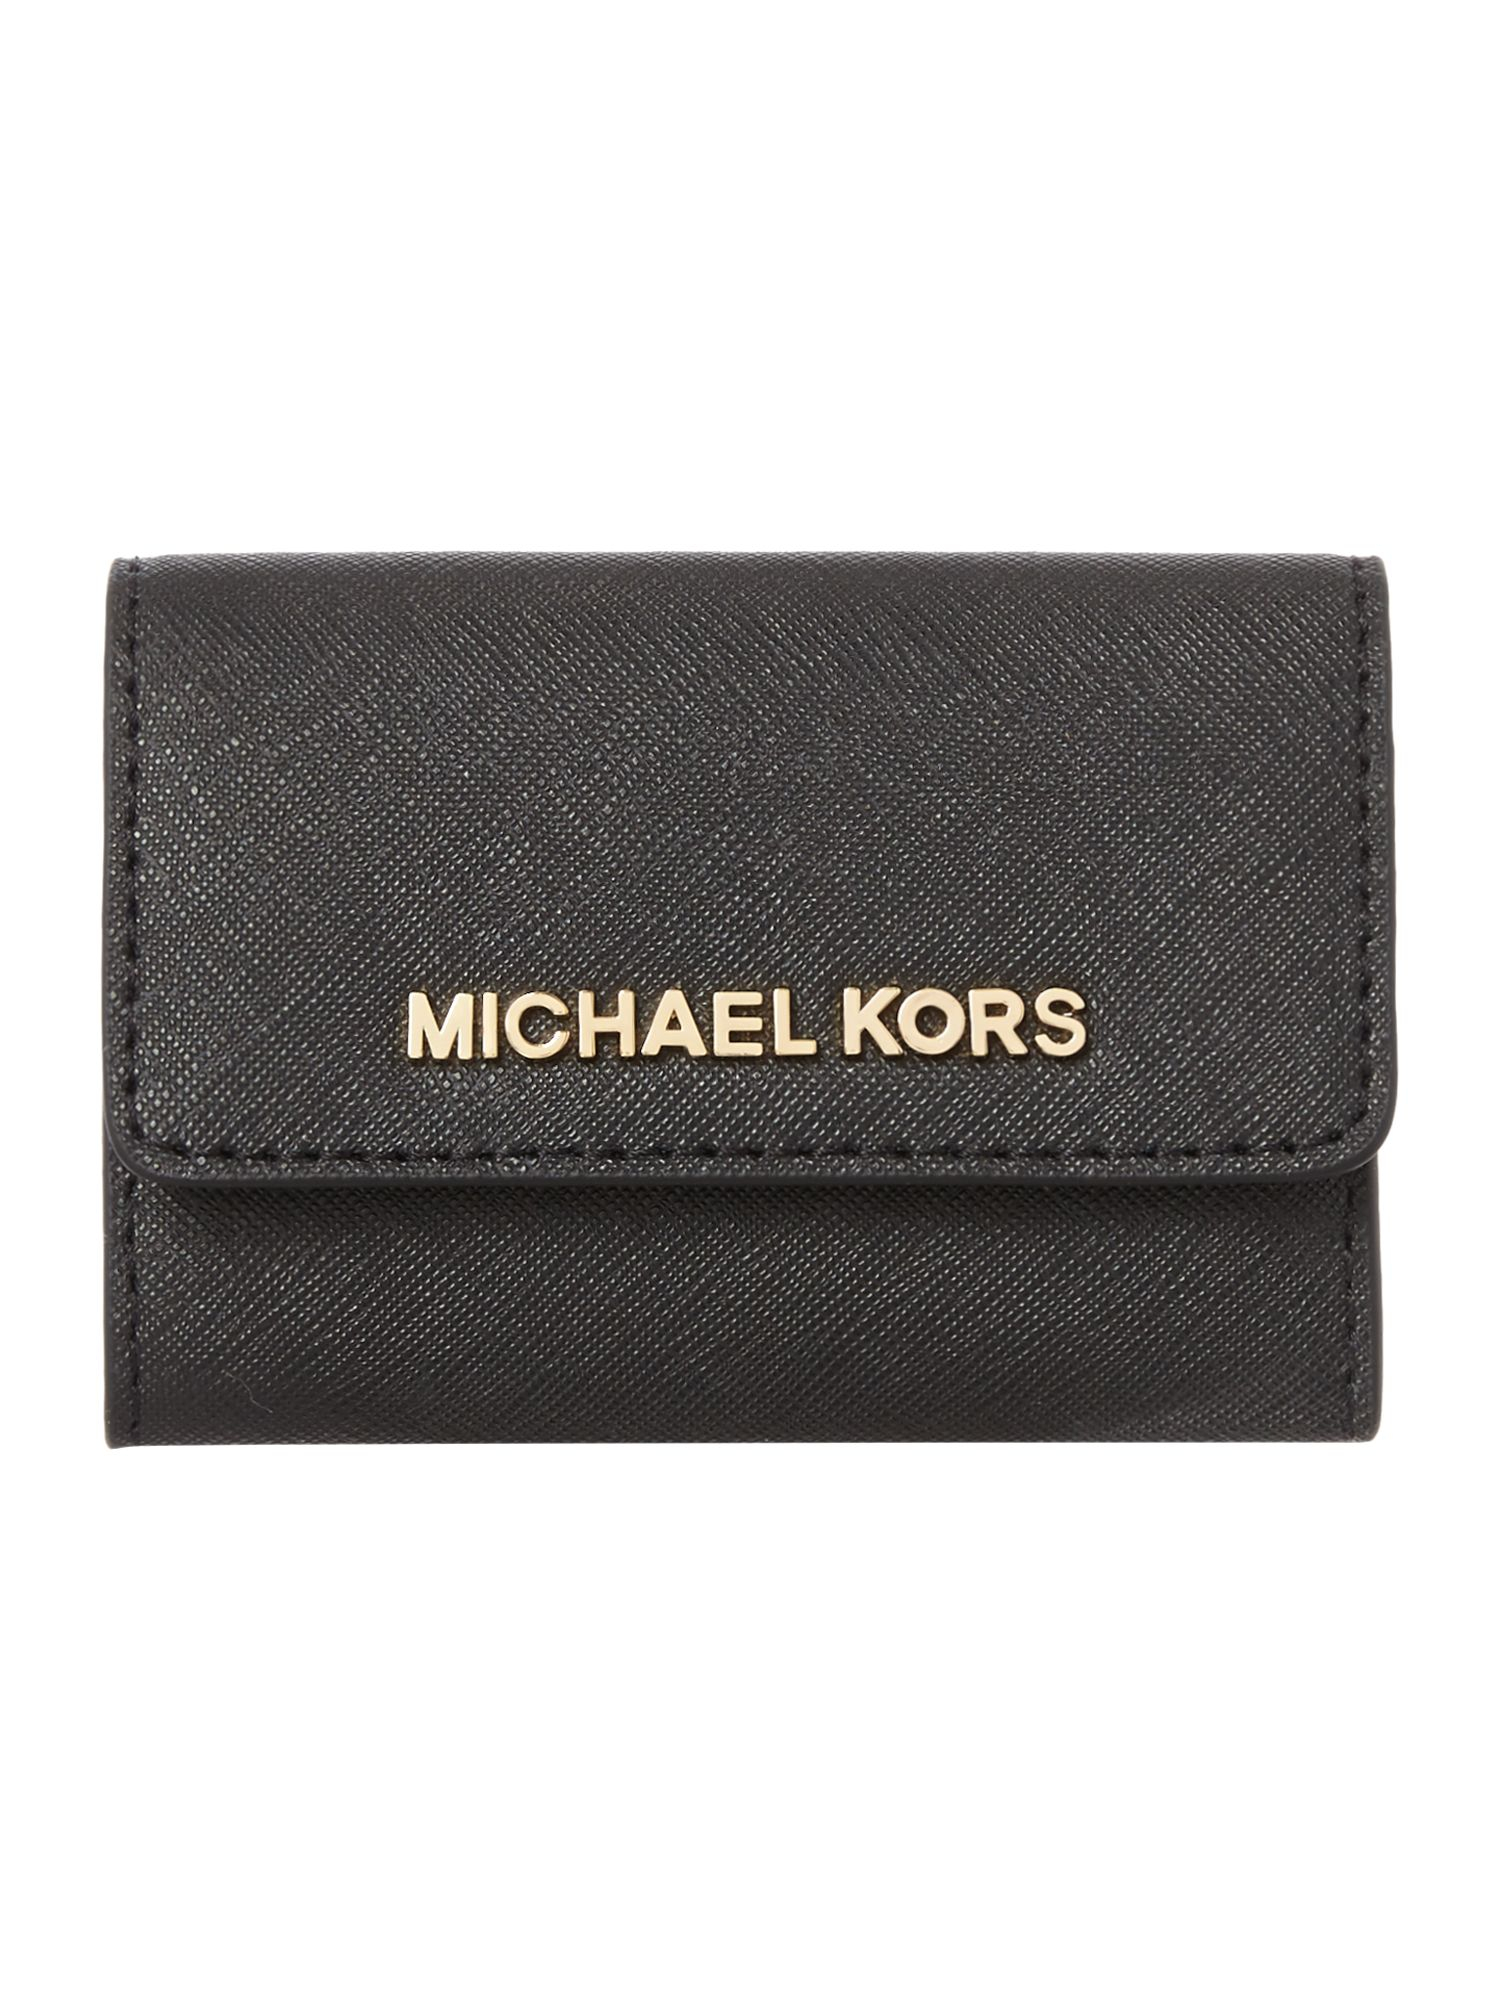 Michael kors Jetset Travel Black Small Flapover Coin Purse in Black | Lyst